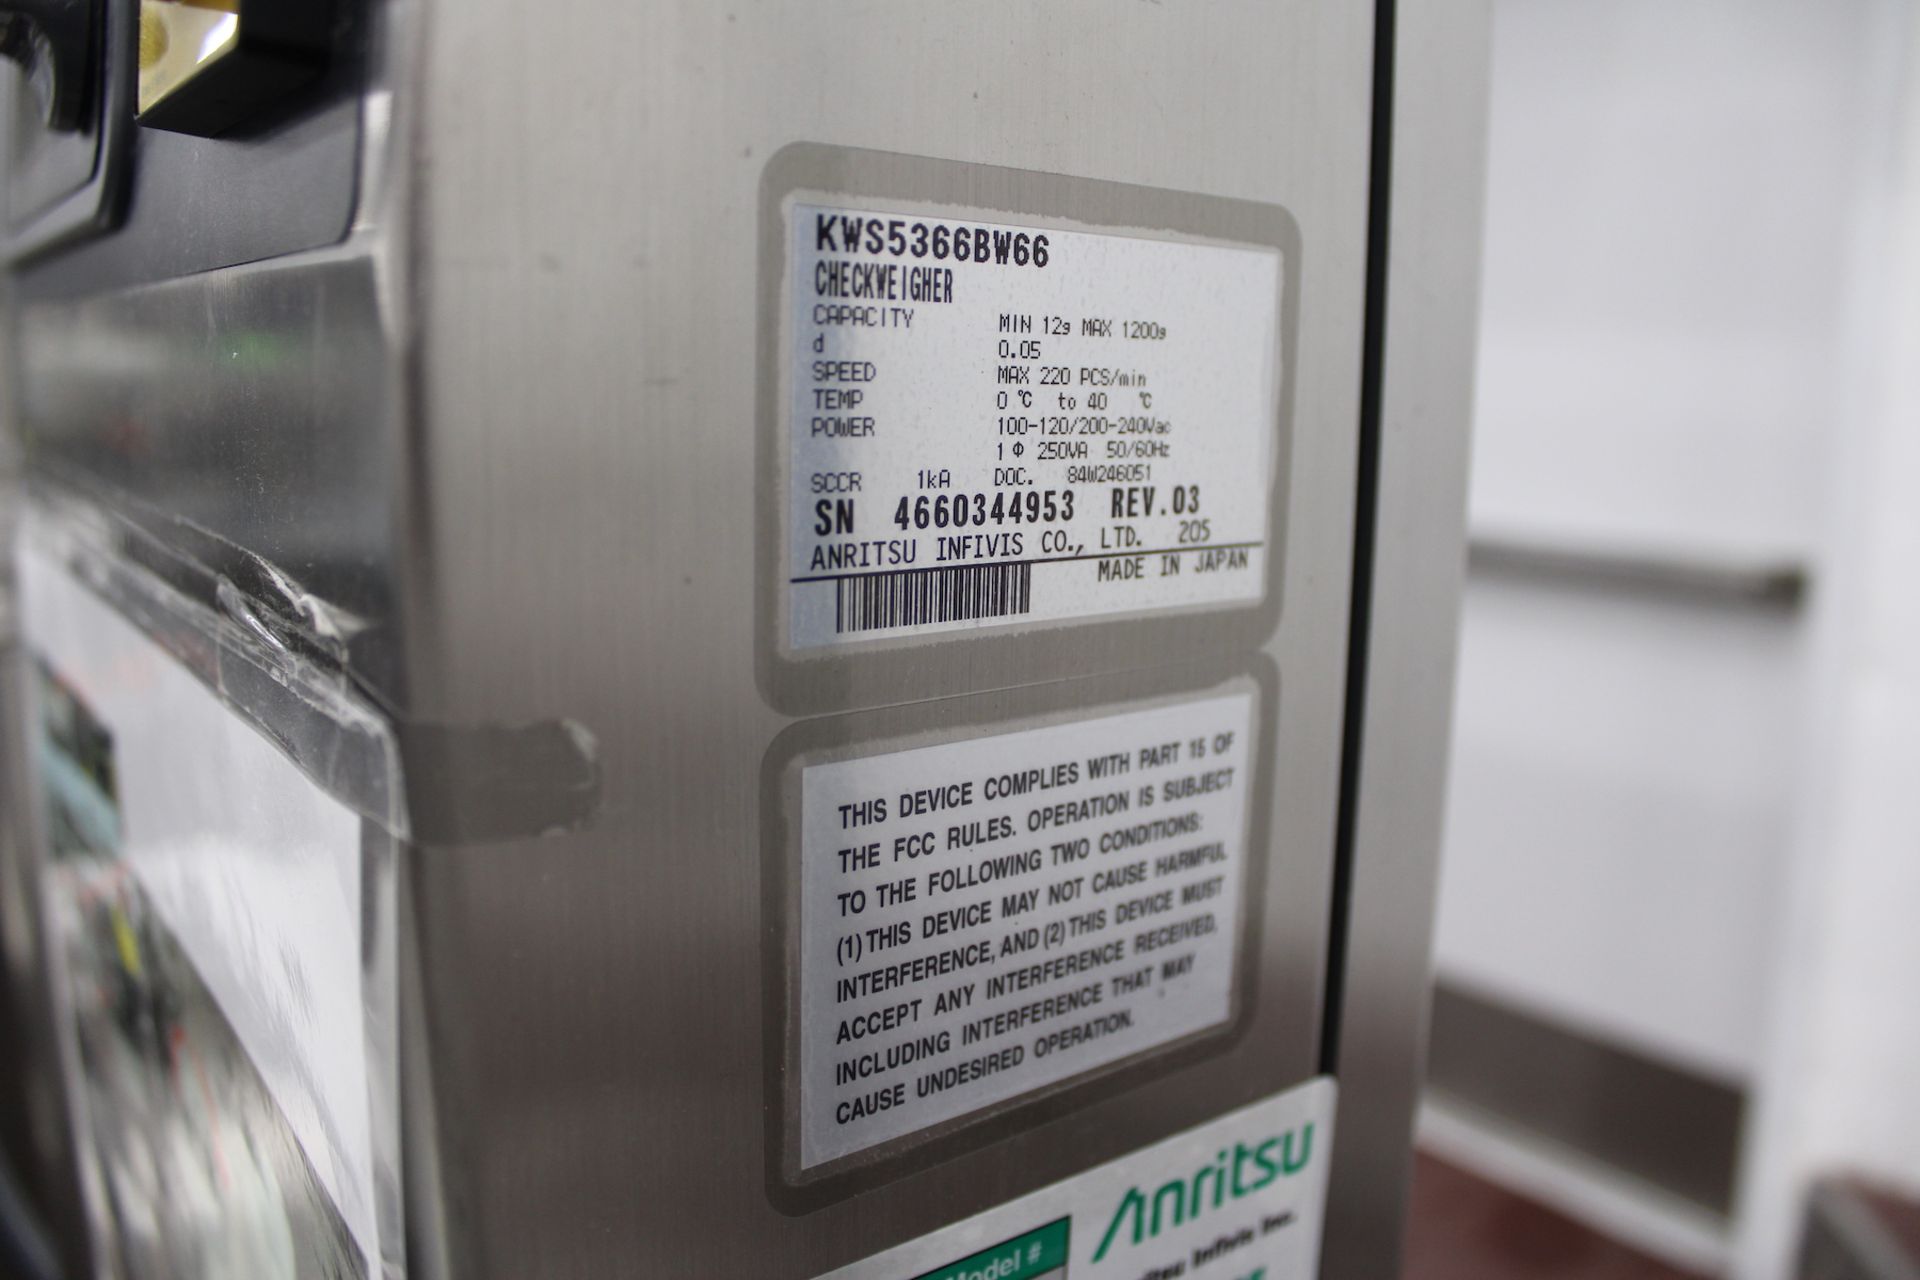 ANRITSU CHECK WEIGHER SYSTEM, MODEL SSV SERIES KWS5366BW66, S/N 4660344953, WITH PRODUCT REJECT - Image 8 of 9